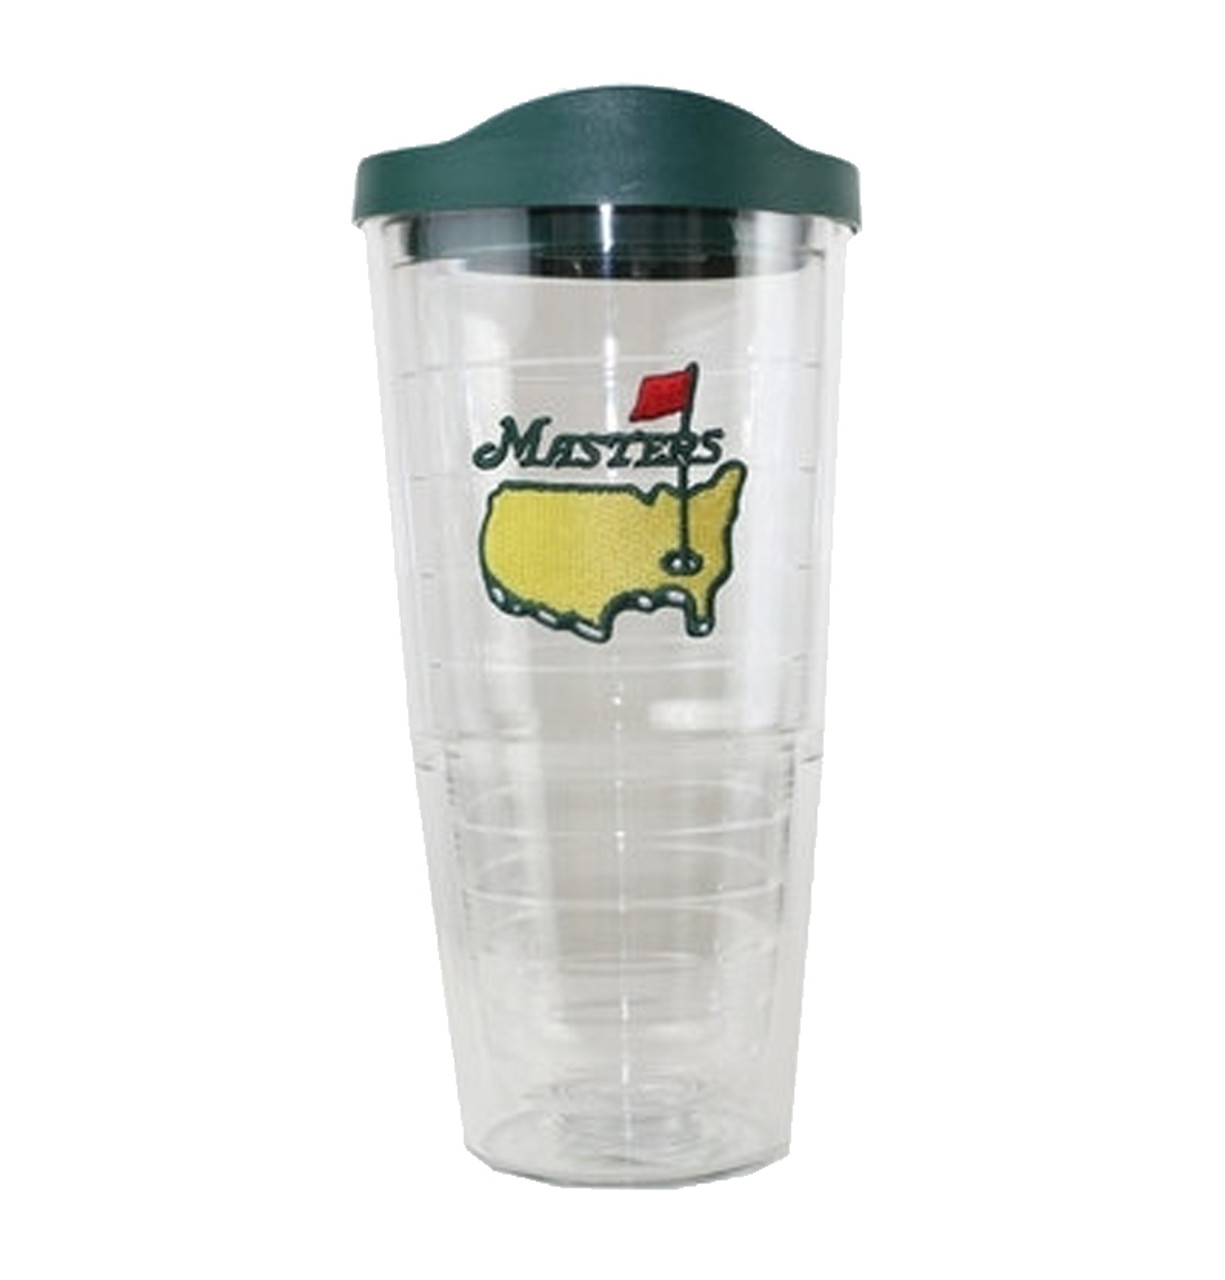 WSU 24 oz. Tervis Tumblers - Set of 2 at M.LaHart & Co.